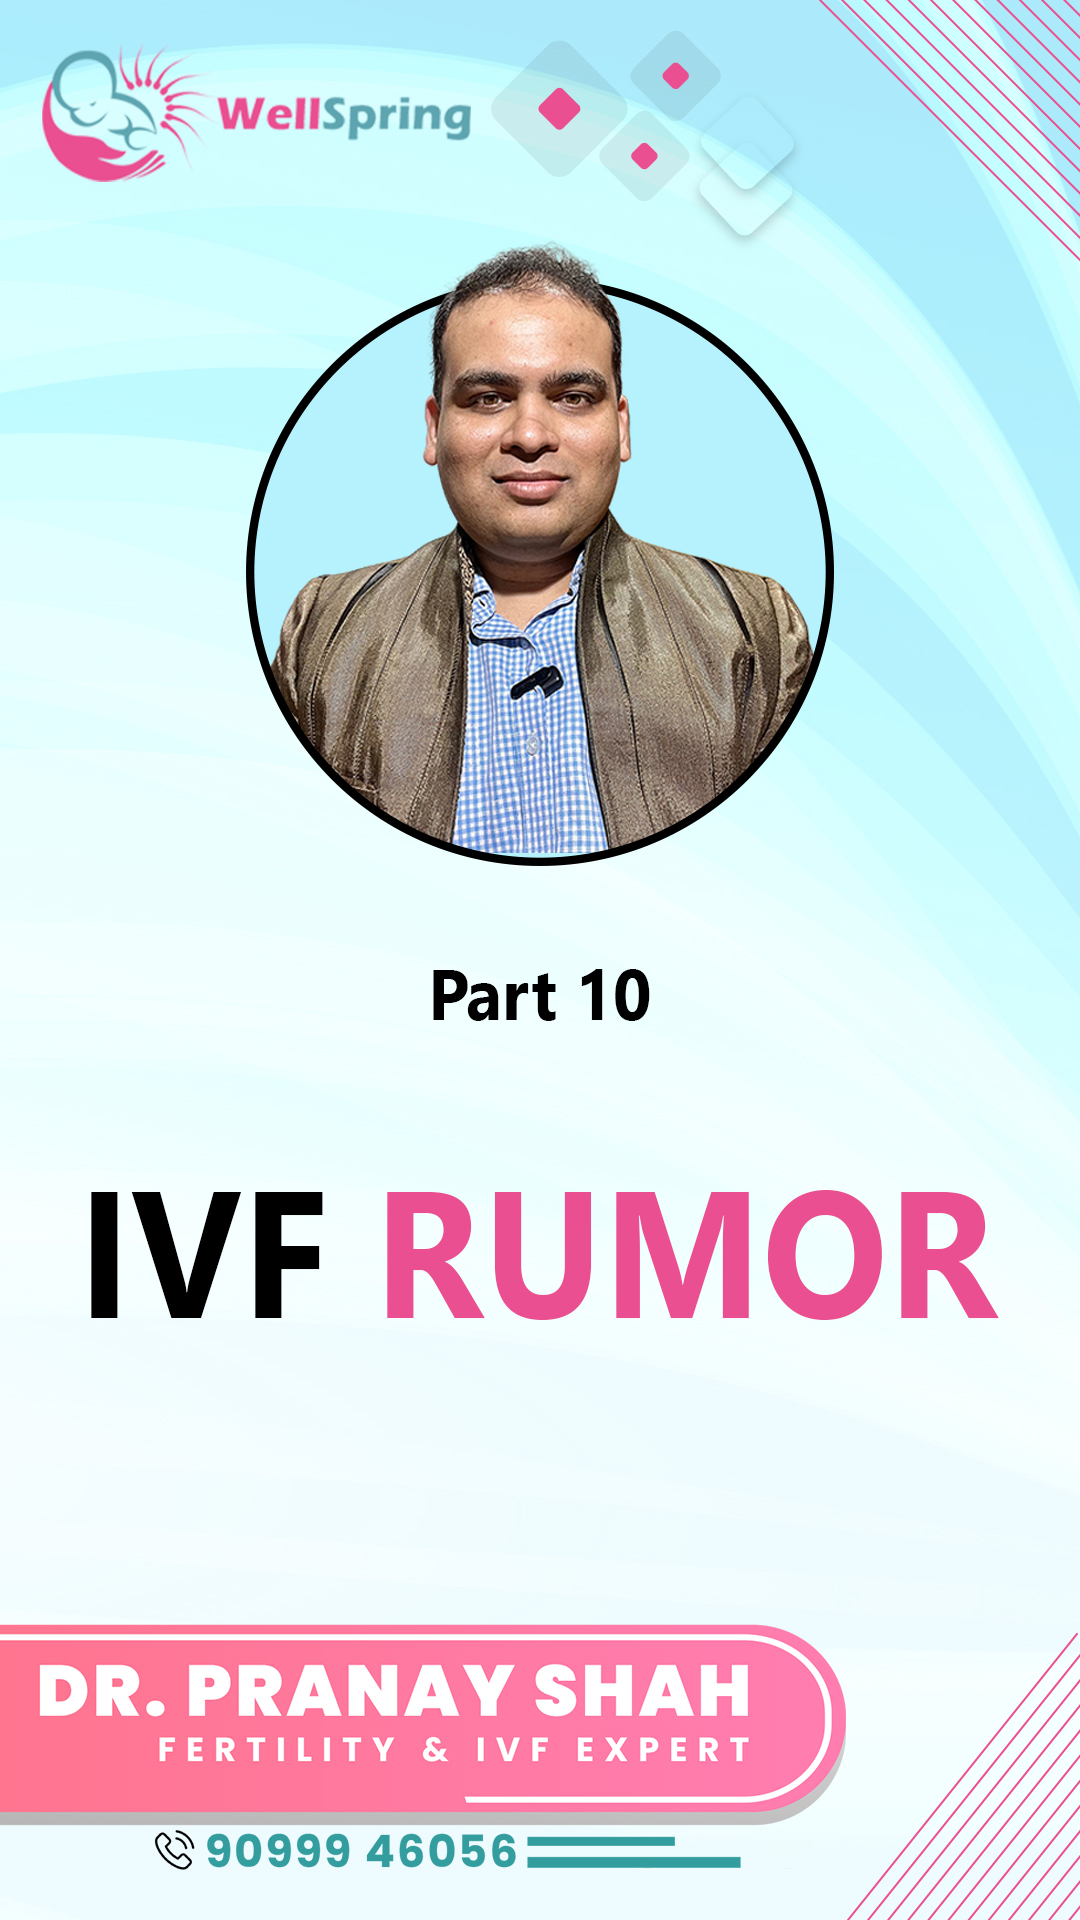 IVF Rumor myths and misinformation guide – Part 10